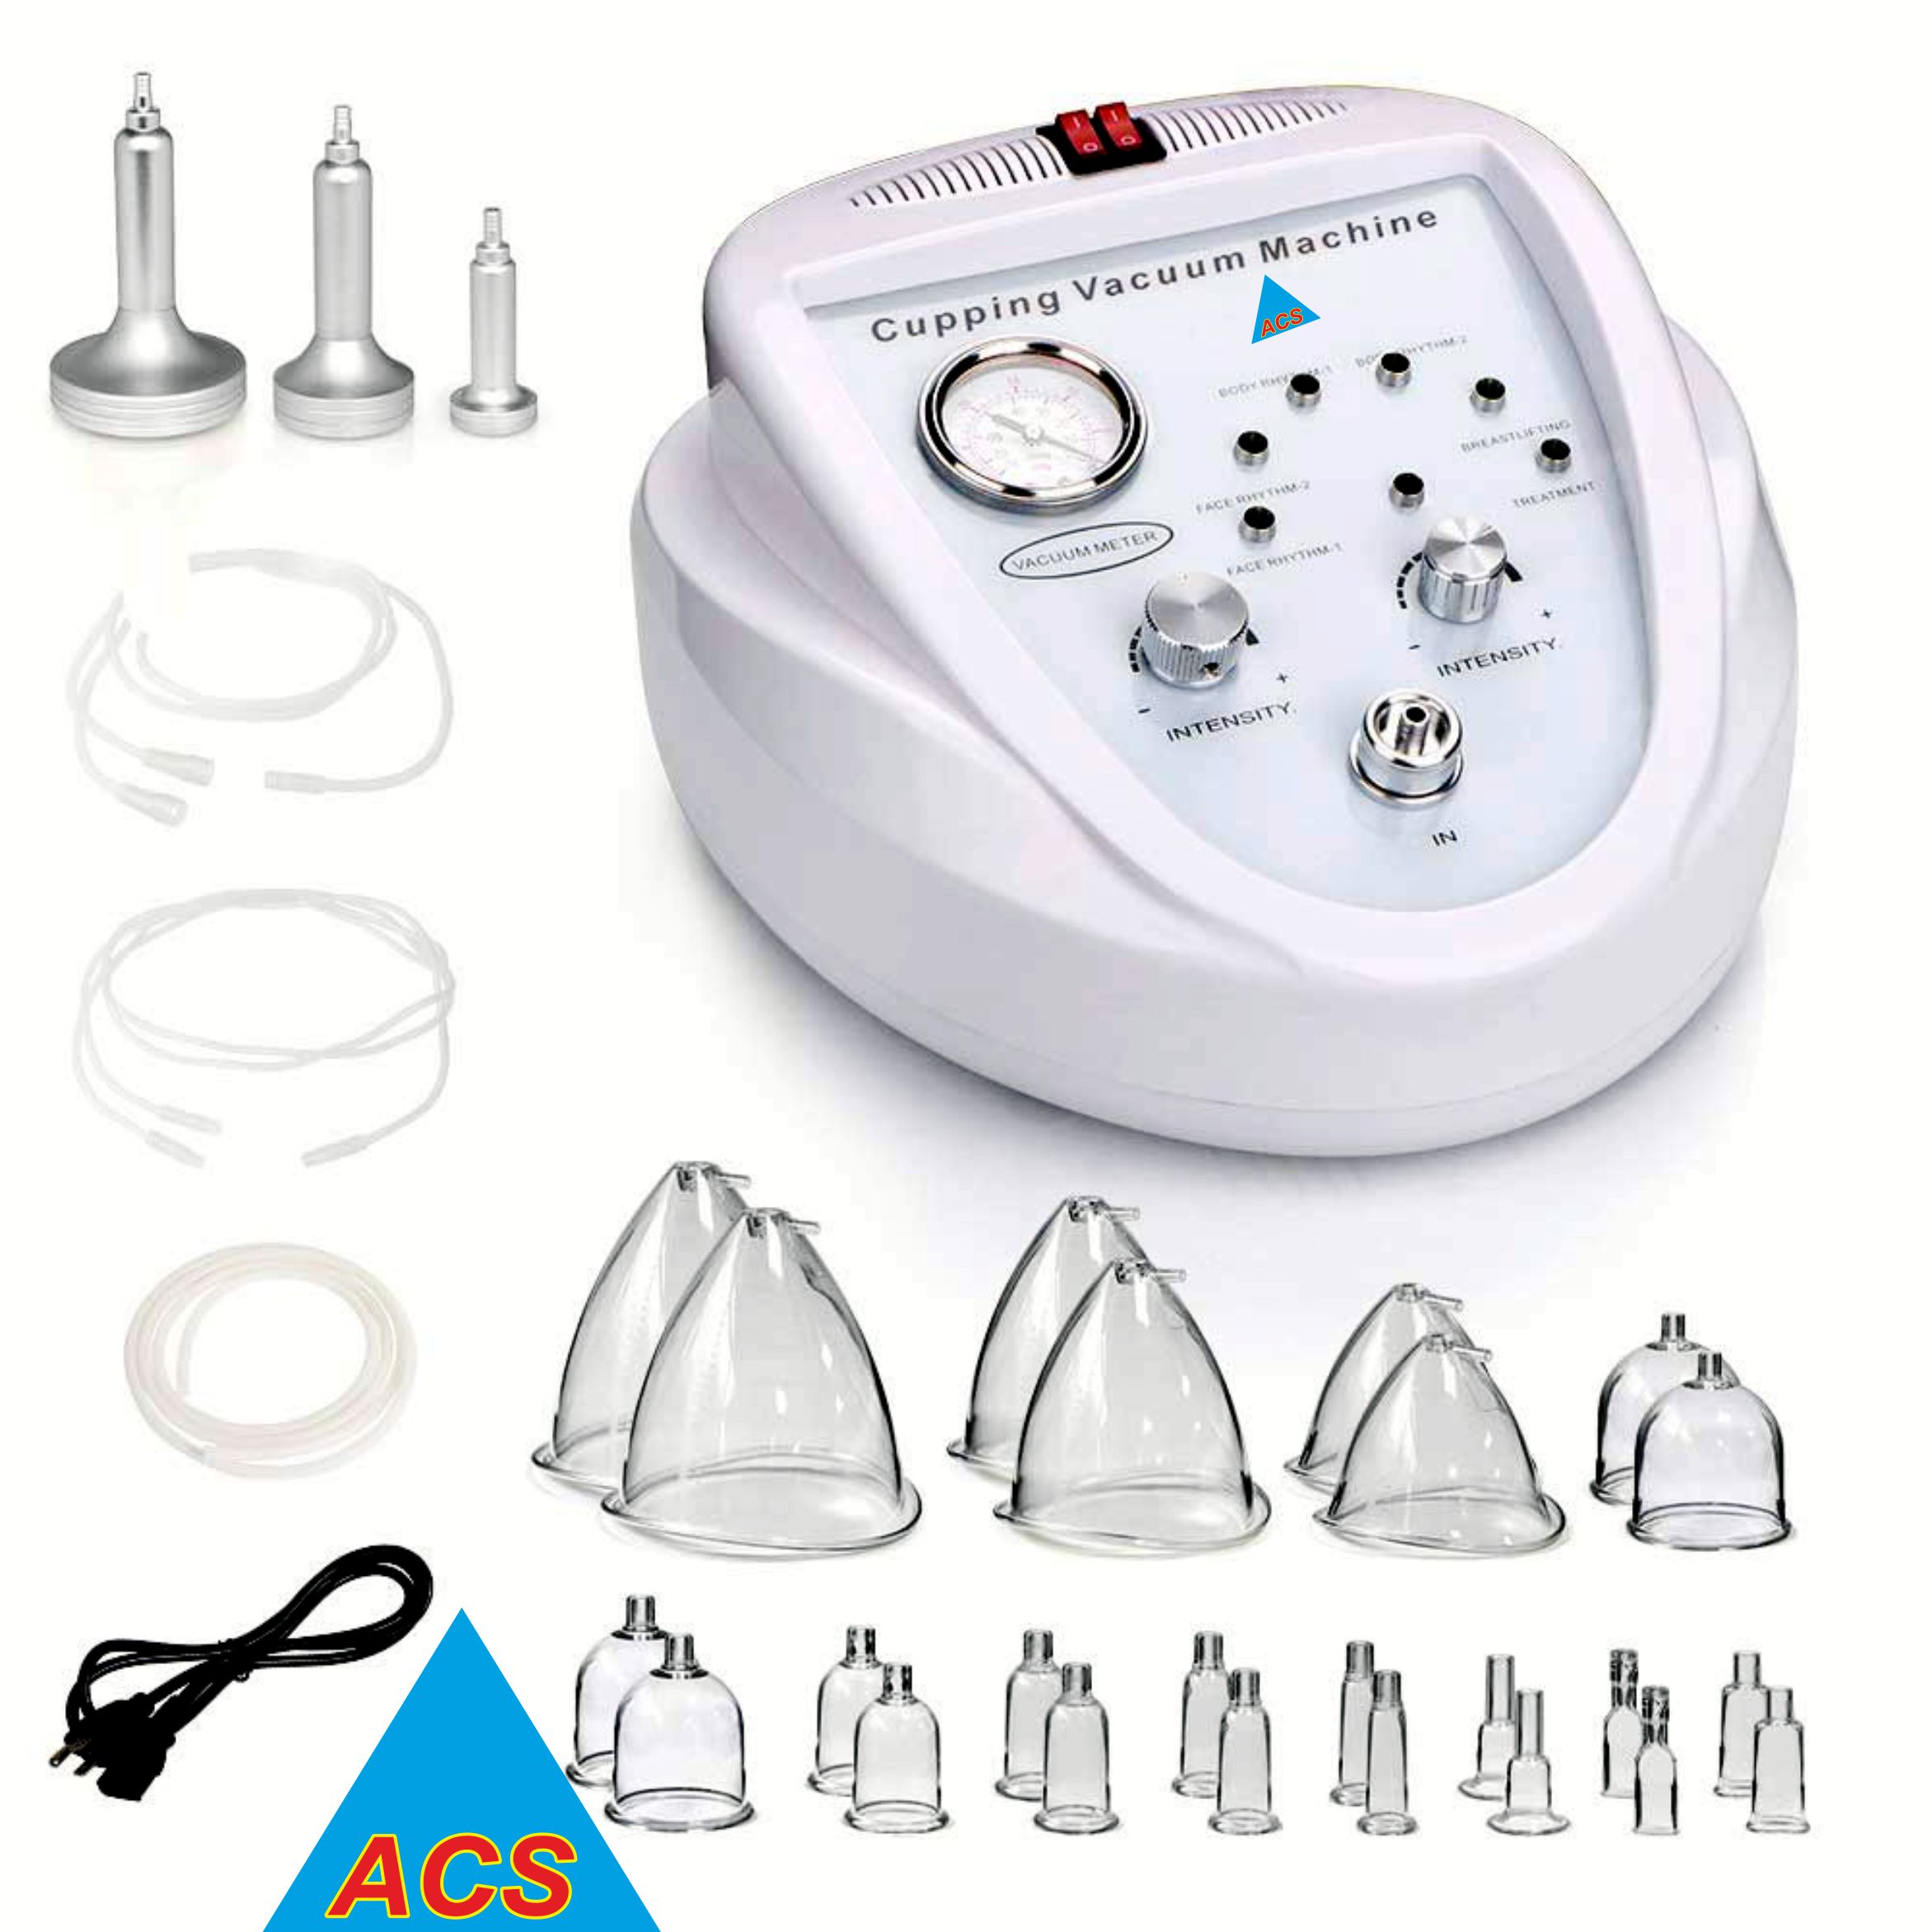 ACS Vaccum Cupping Therapy Machine  - HPP 